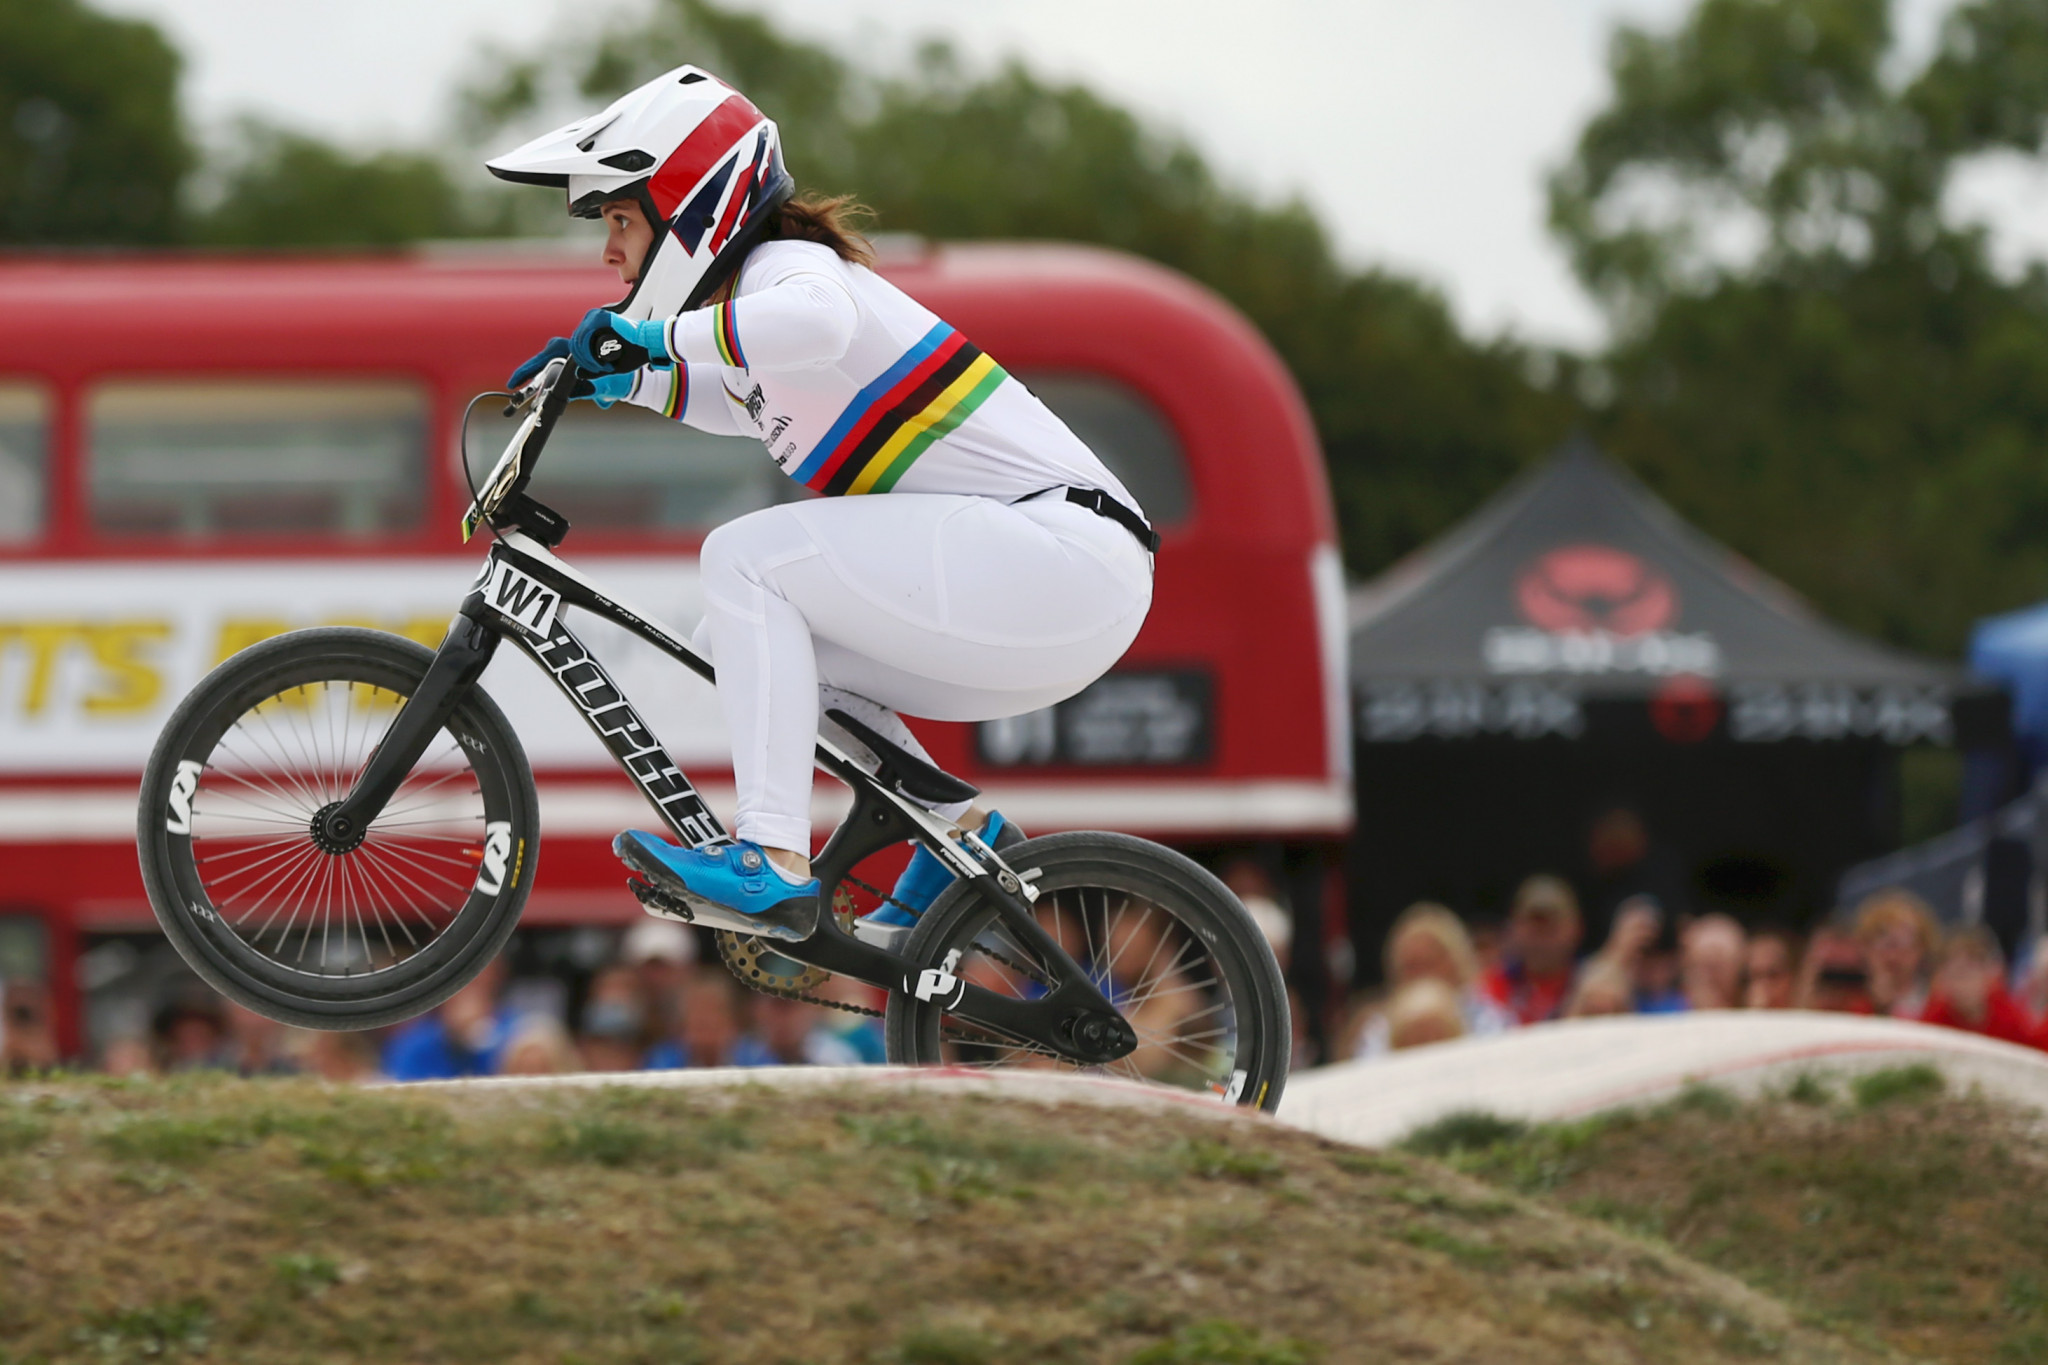 Britain's Shriever and Whyte star at UEC BMX Racing European Championships